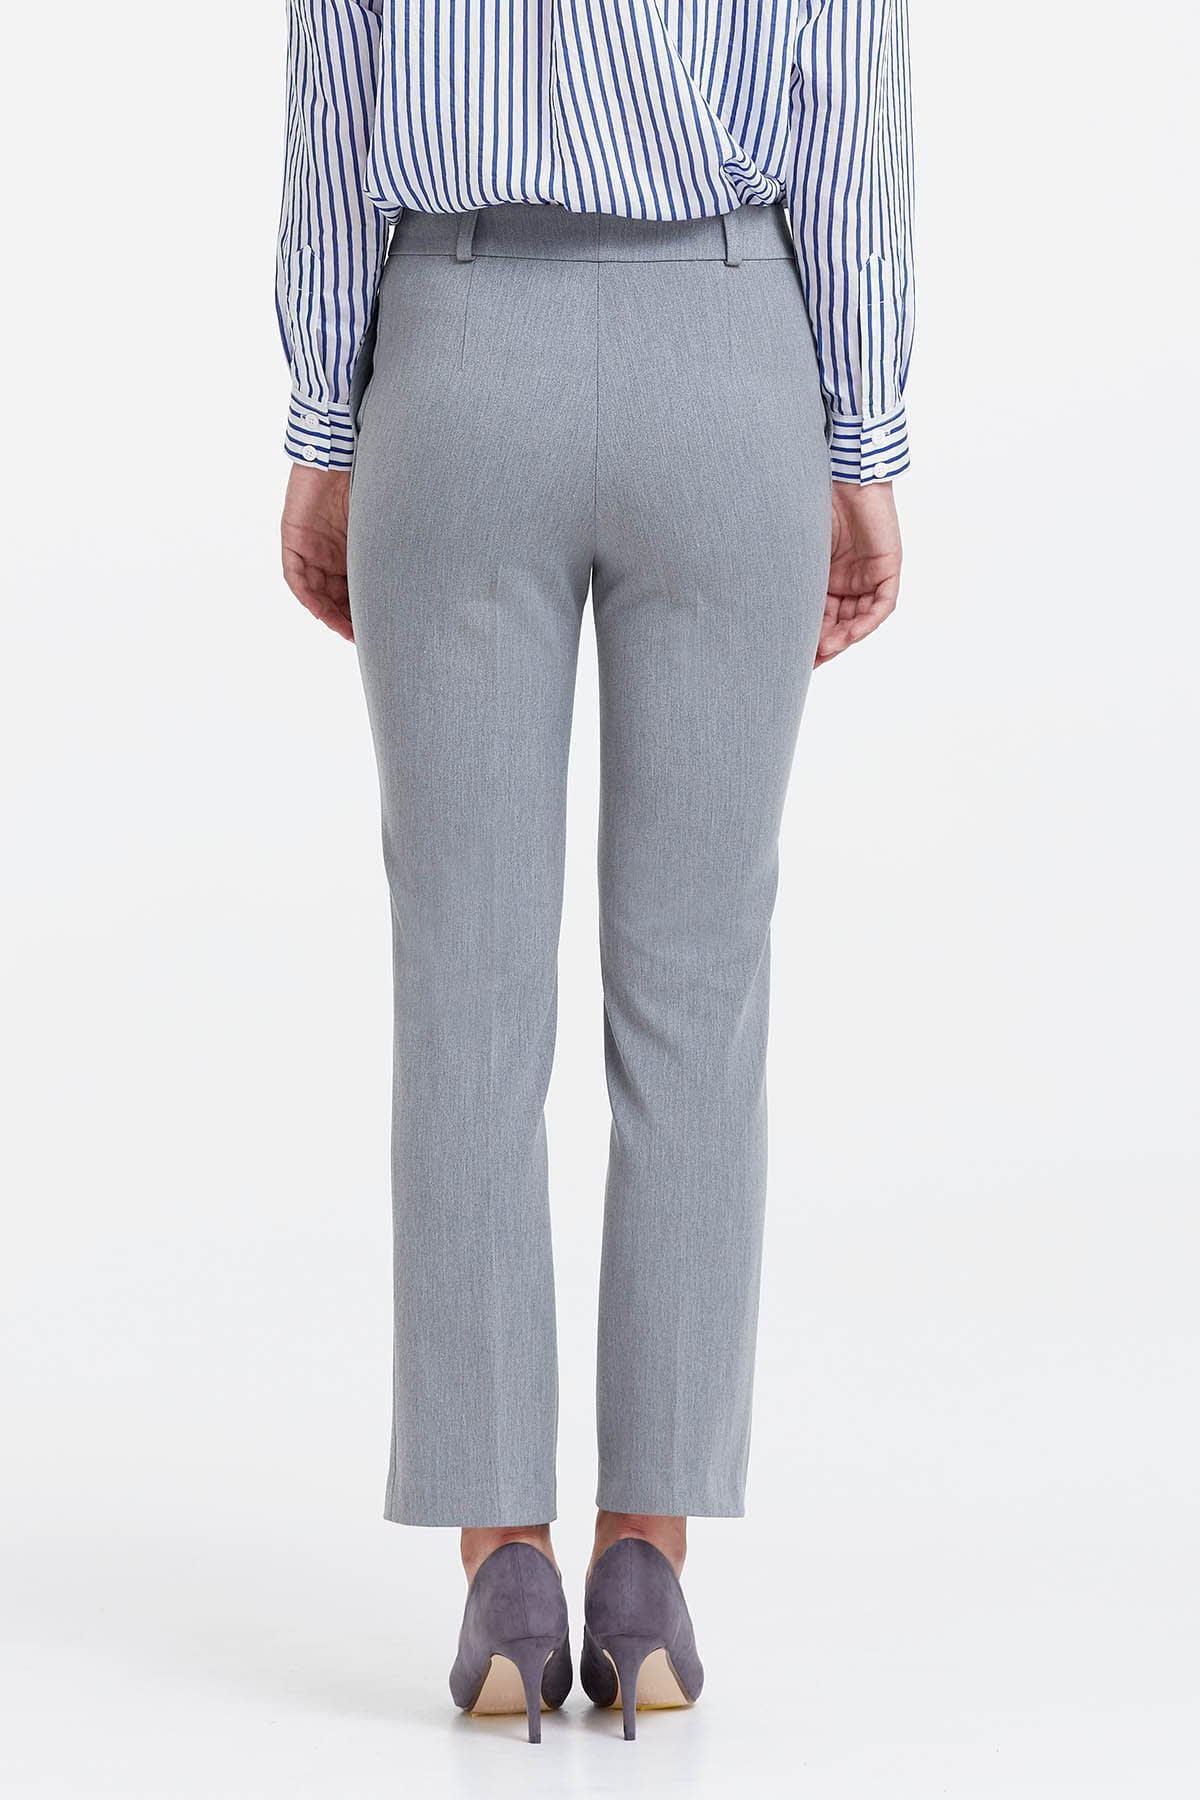 Grey trousers with slits , photo 5